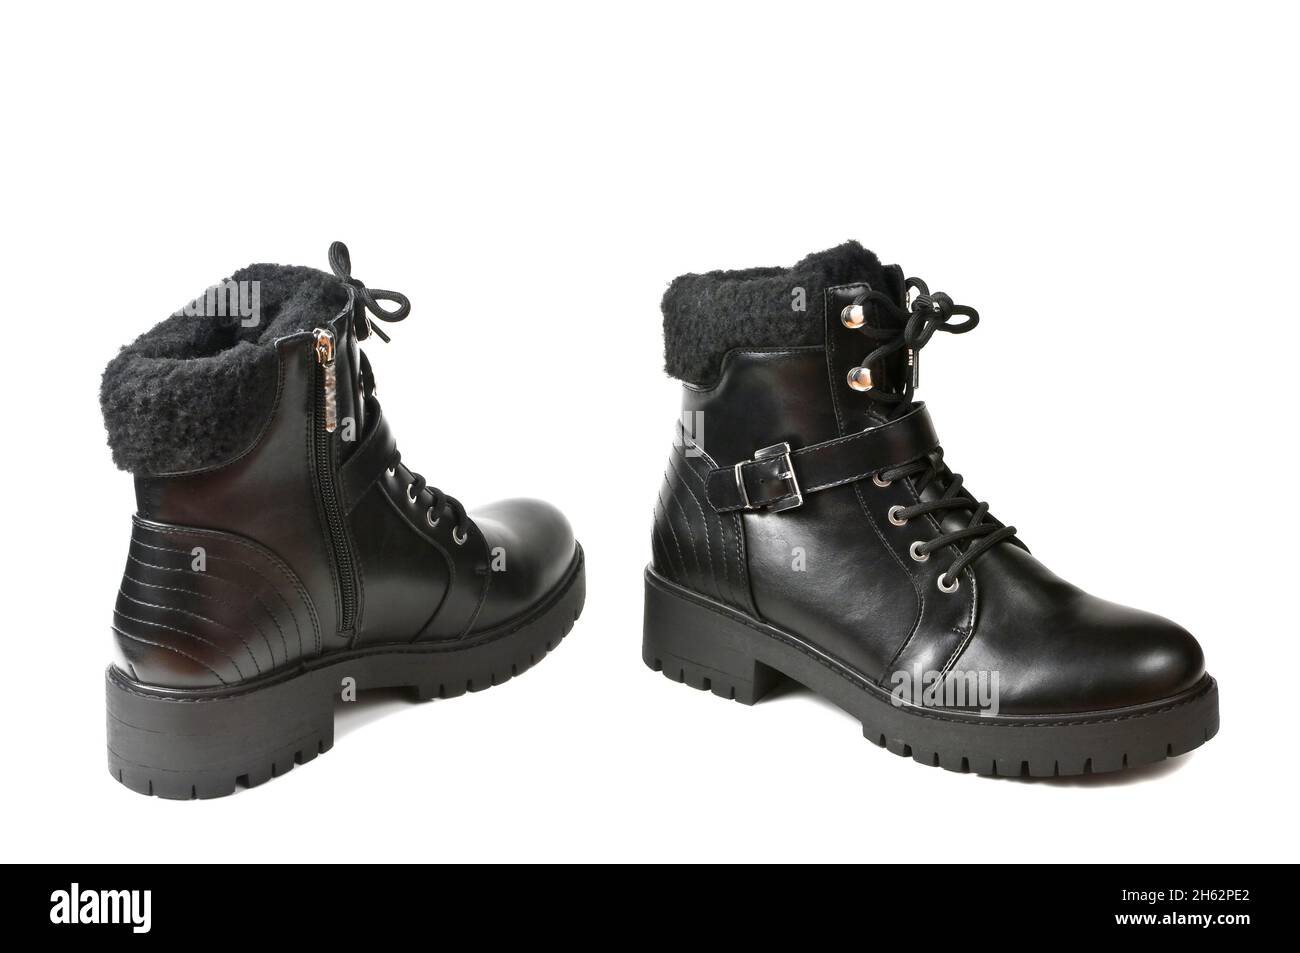 Black and modern women's boots. Stock Photo